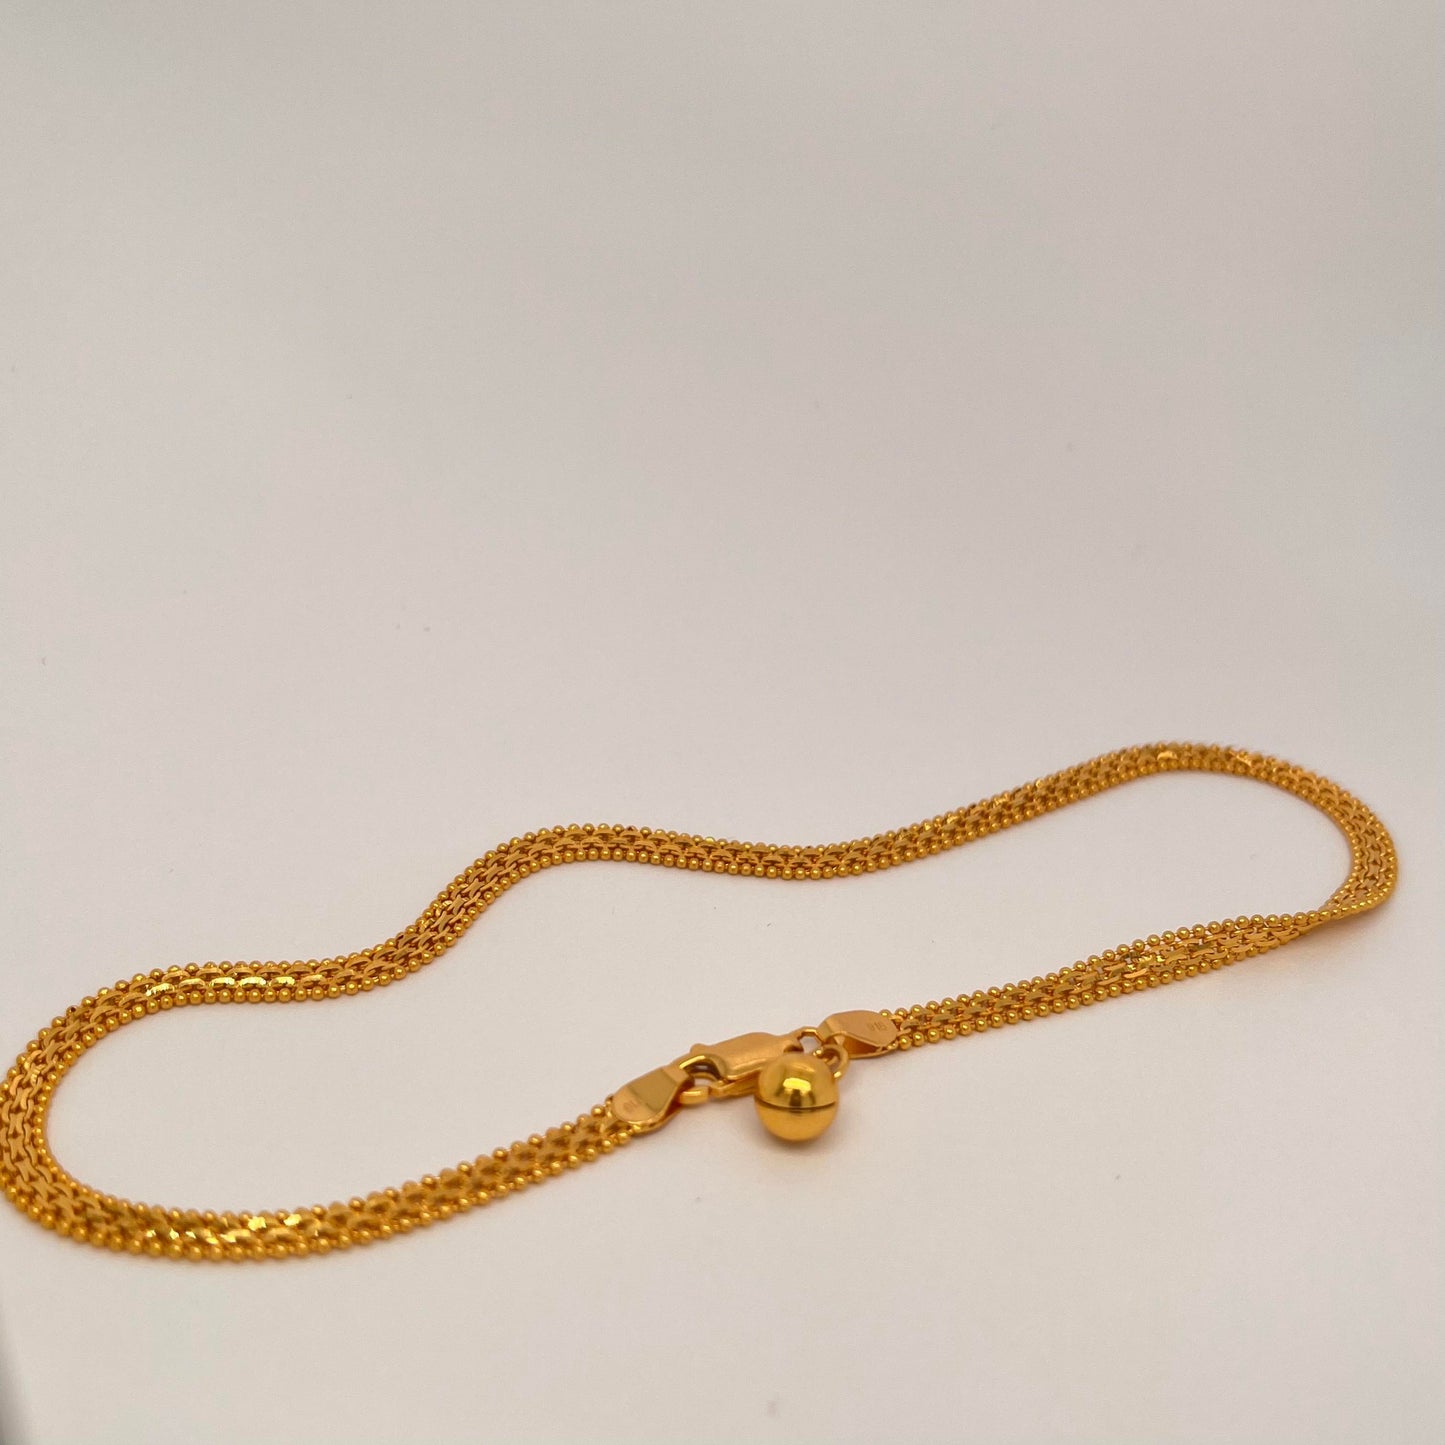 22KT Gold Anklet Link Chain, with Bell